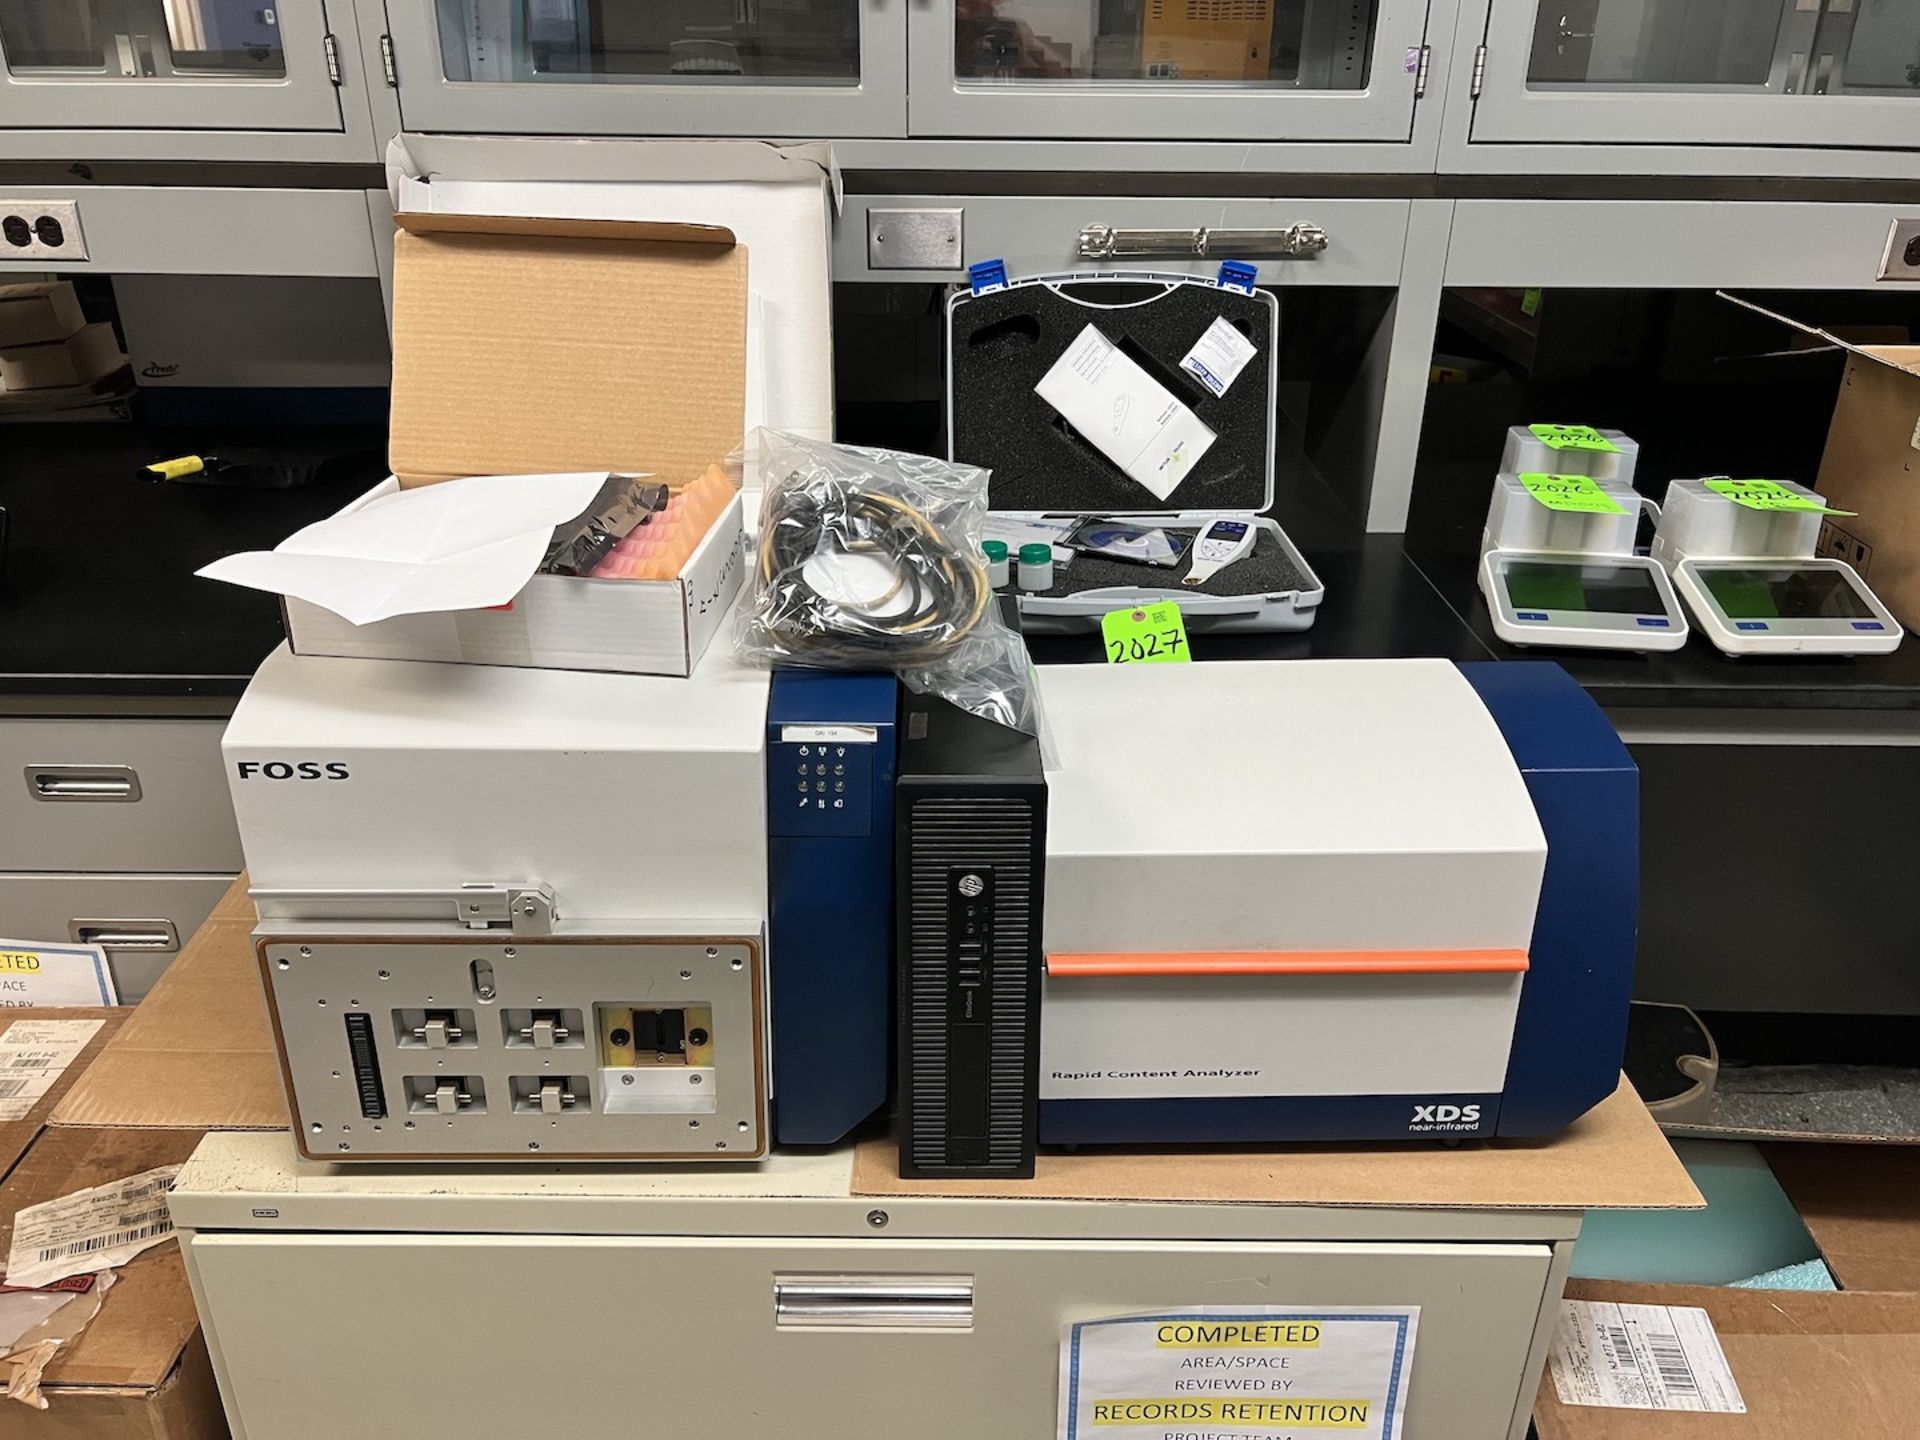 FOSS XDS NEAR INFRARED RAPID CONTENT ANALYZER WITH XDS MONOCROMATOR TYPE XM-1000, XM-1100 SERIES